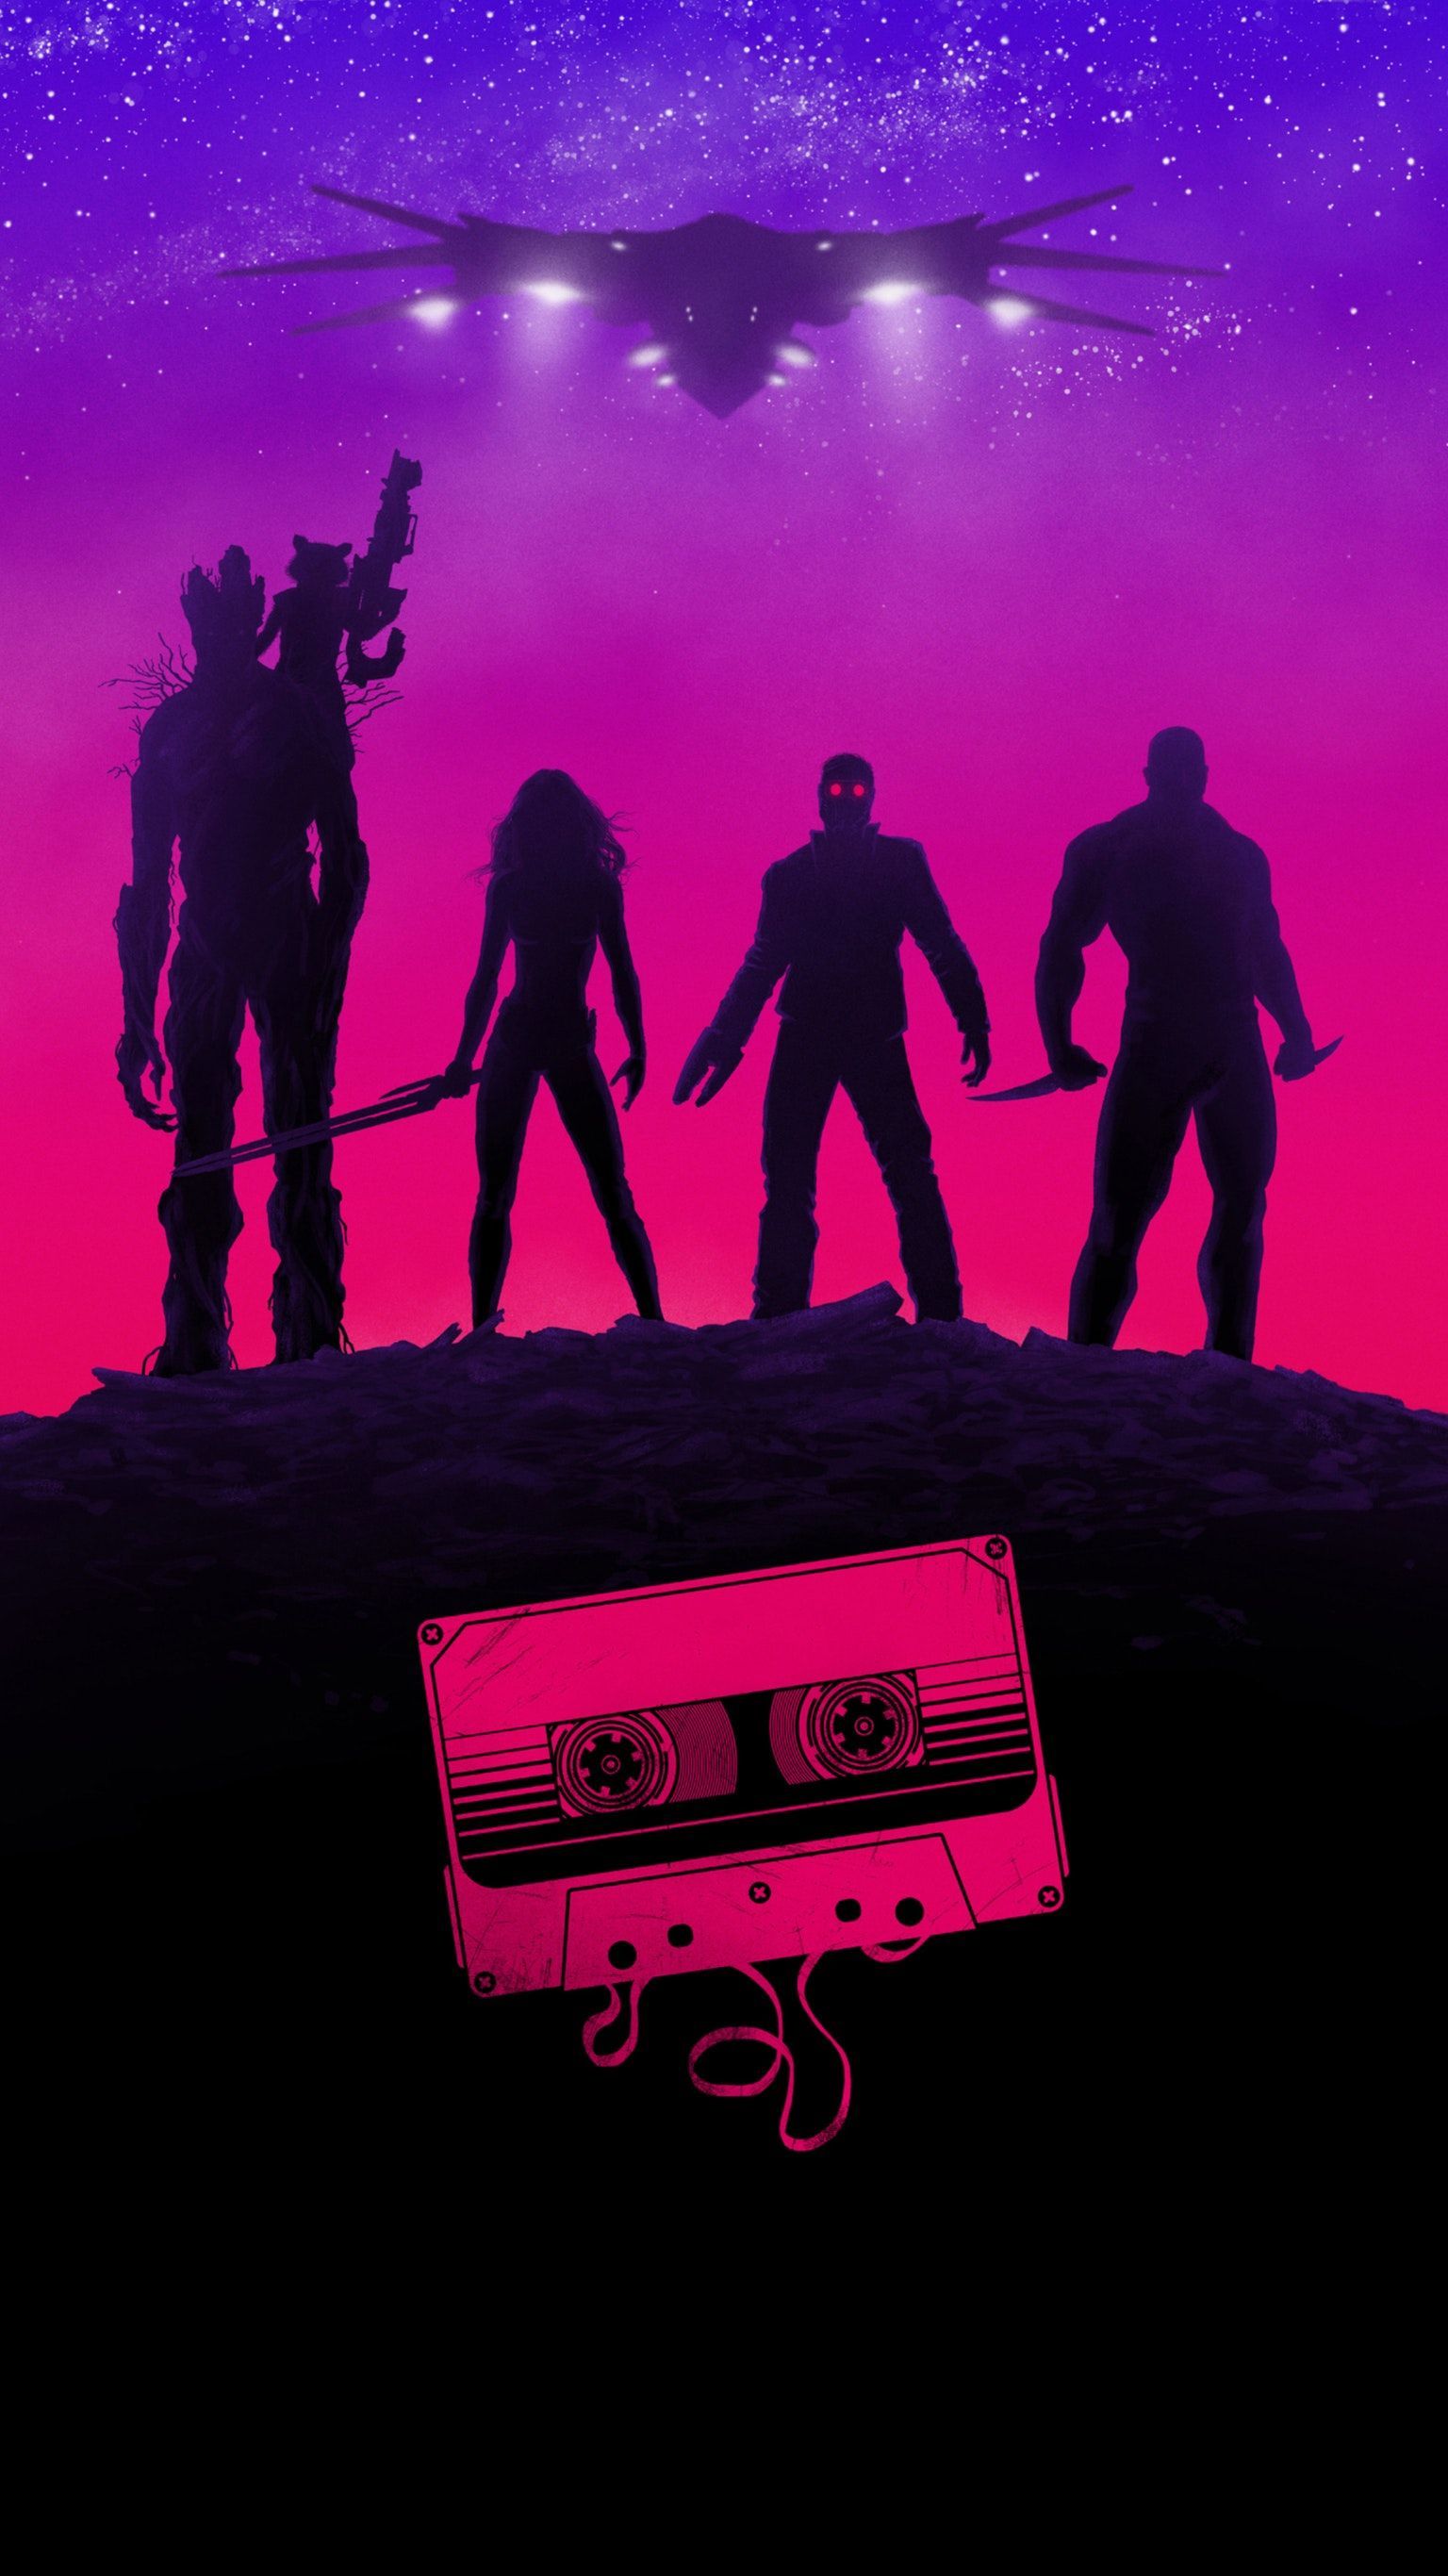 Guardians of the Galaxy (2014) Phone Wallpaper. Moviemania. Galaxy poster, Galaxy movie, Guardians of the galaxy